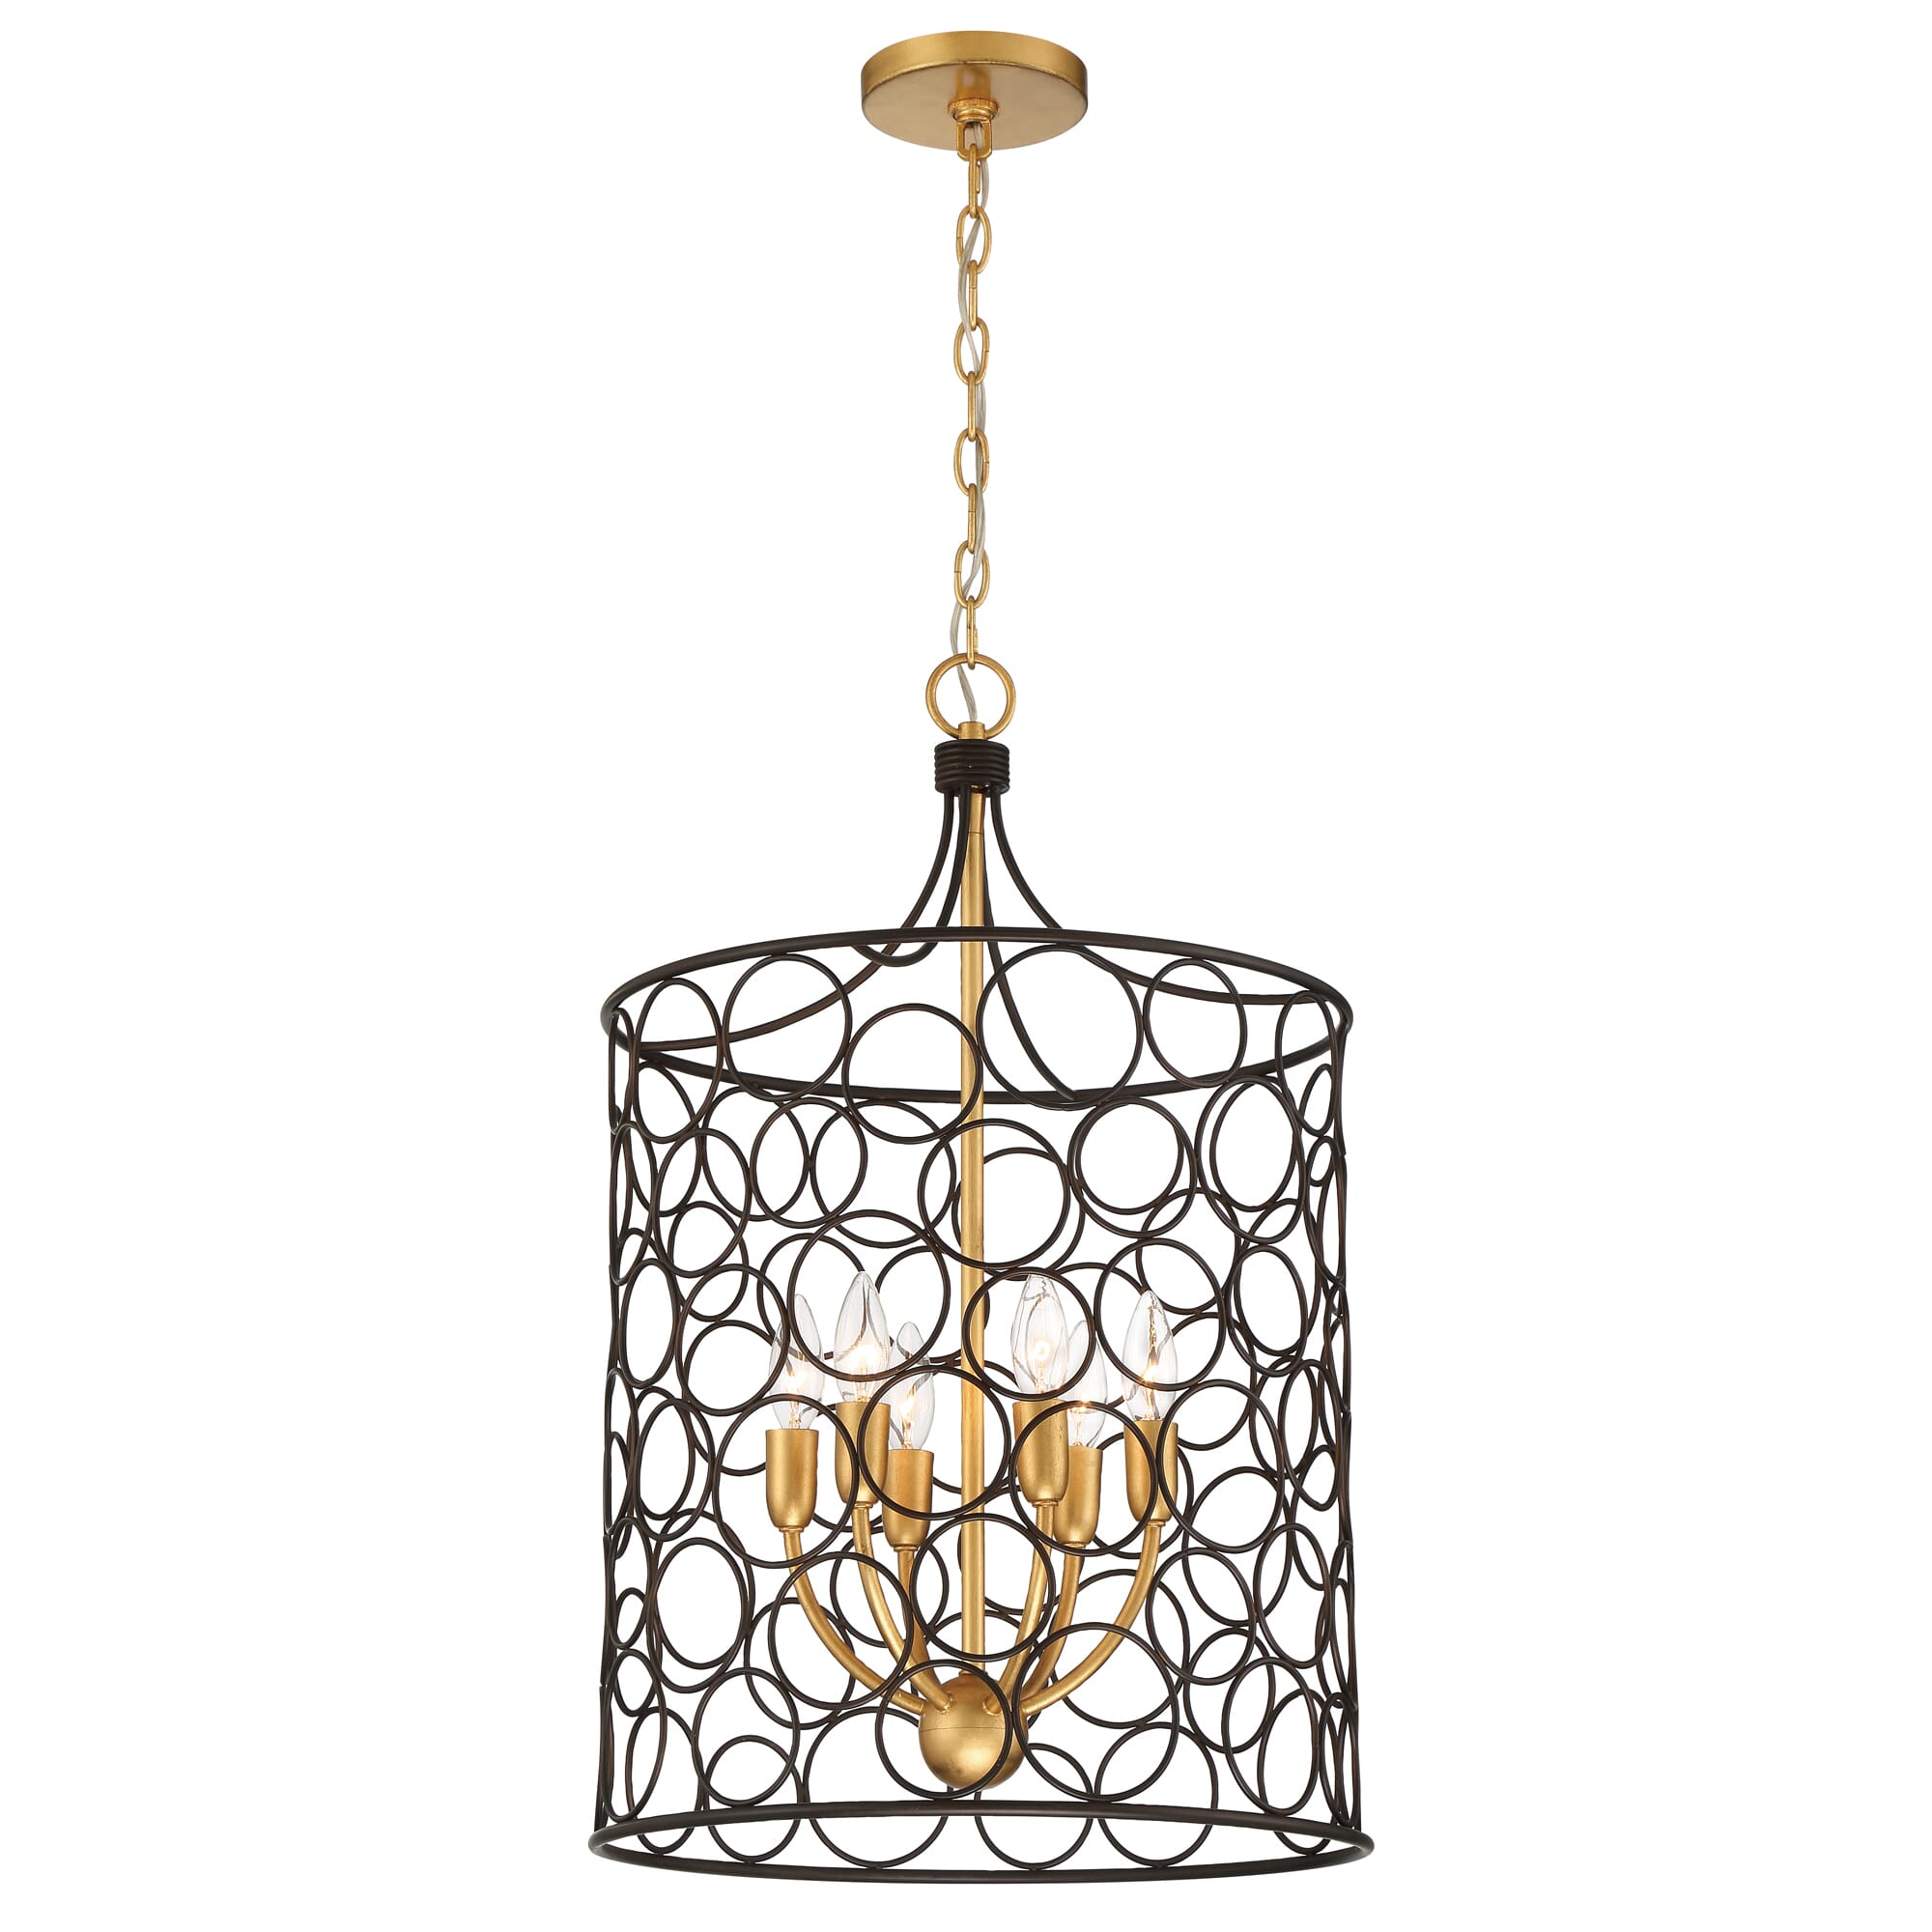 Crystorama Stemmons 6-Light Foyer Light in Bronze and Antique Gold